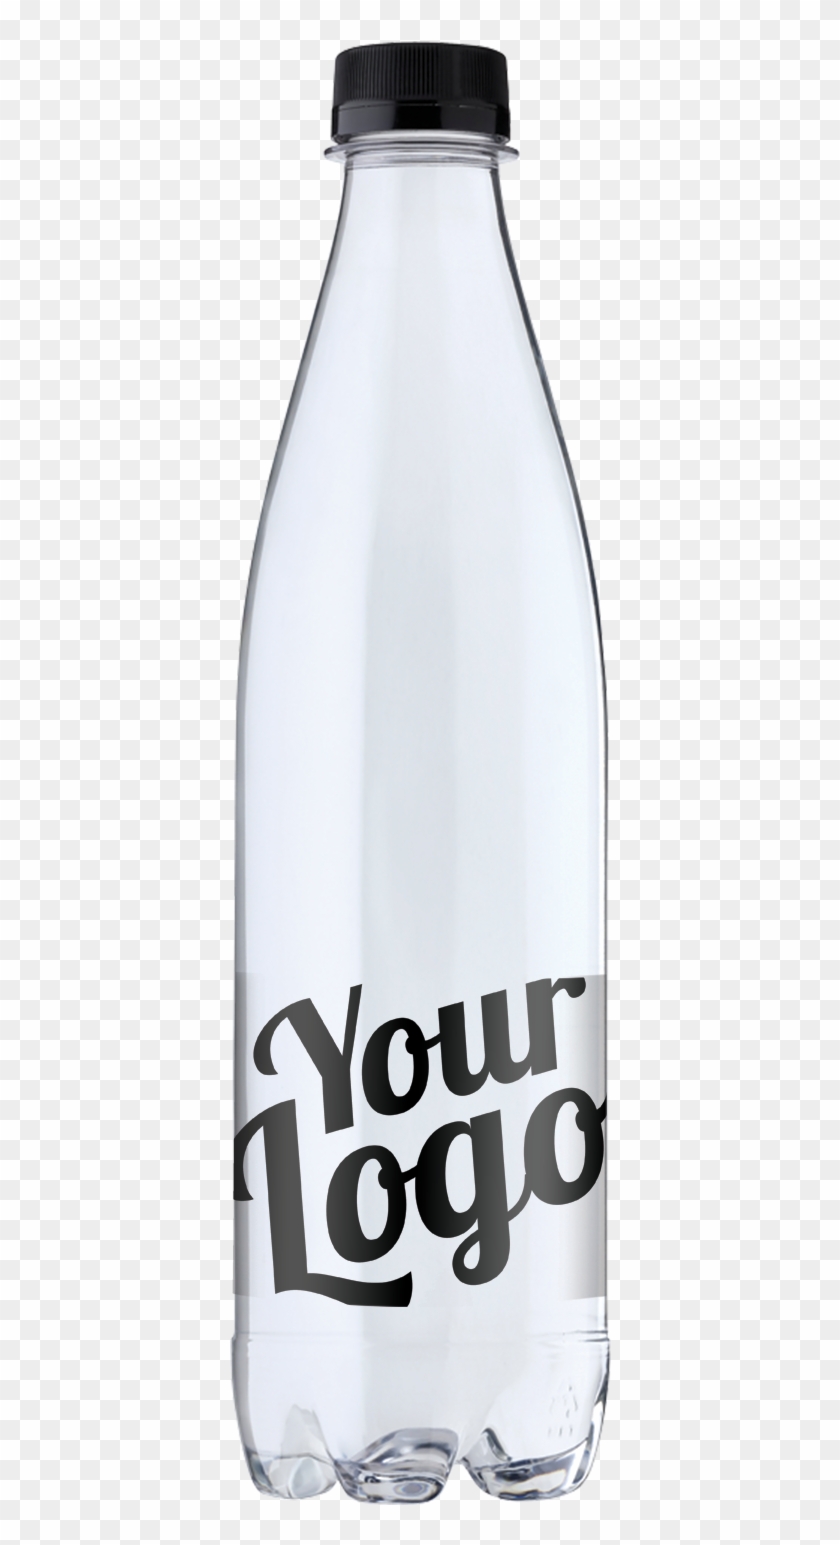 Please Select All Categories And The Price Will Be - Glass Bottle Clipart #4553620